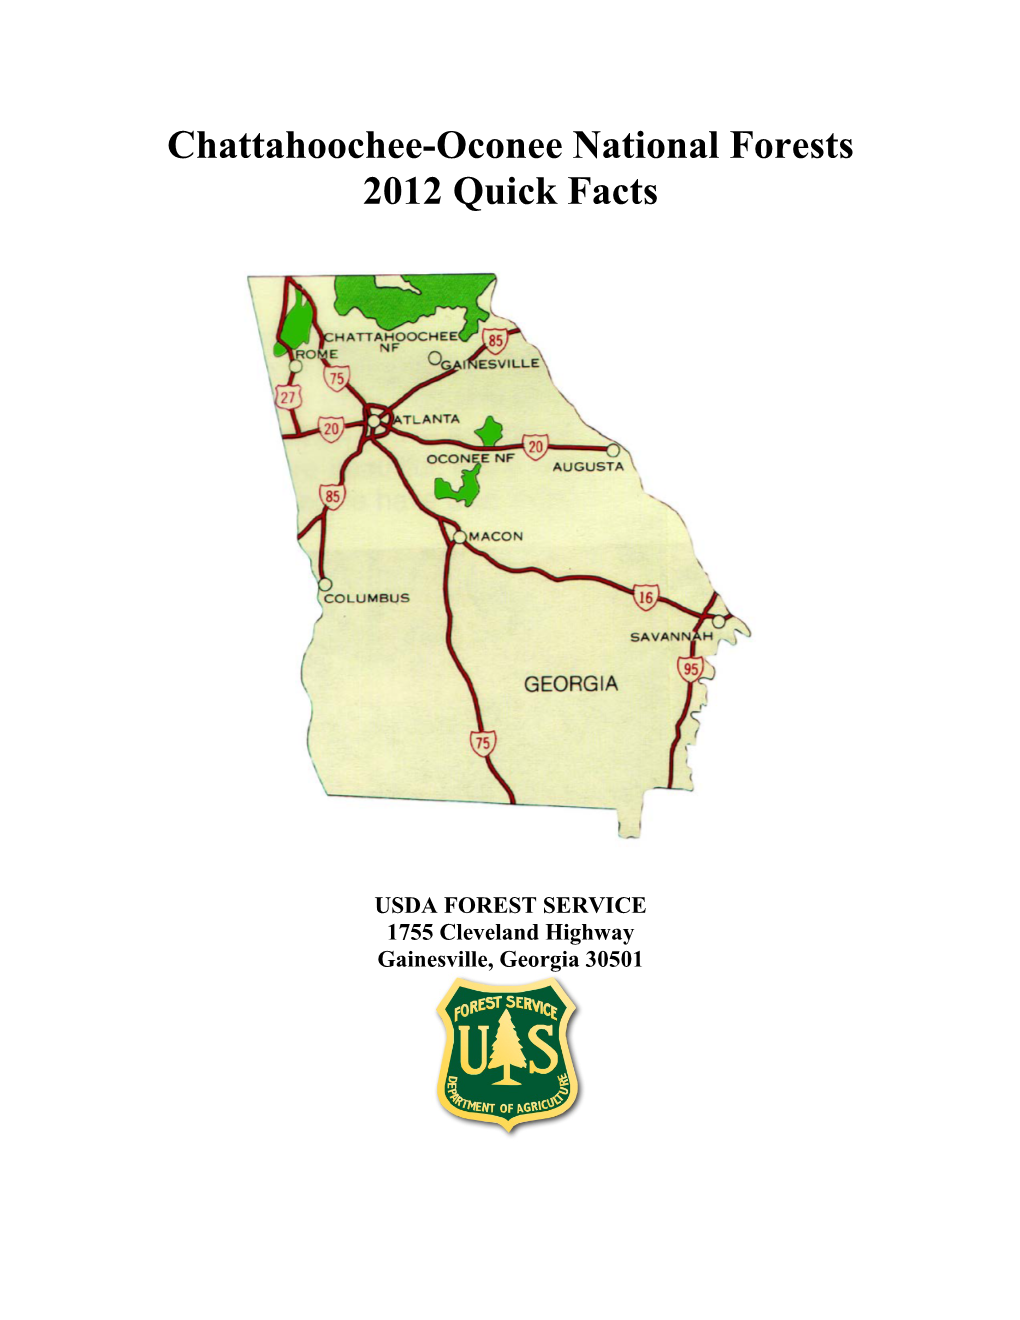 Chattahoochee-Oconee National Forests 2012 Quick Facts